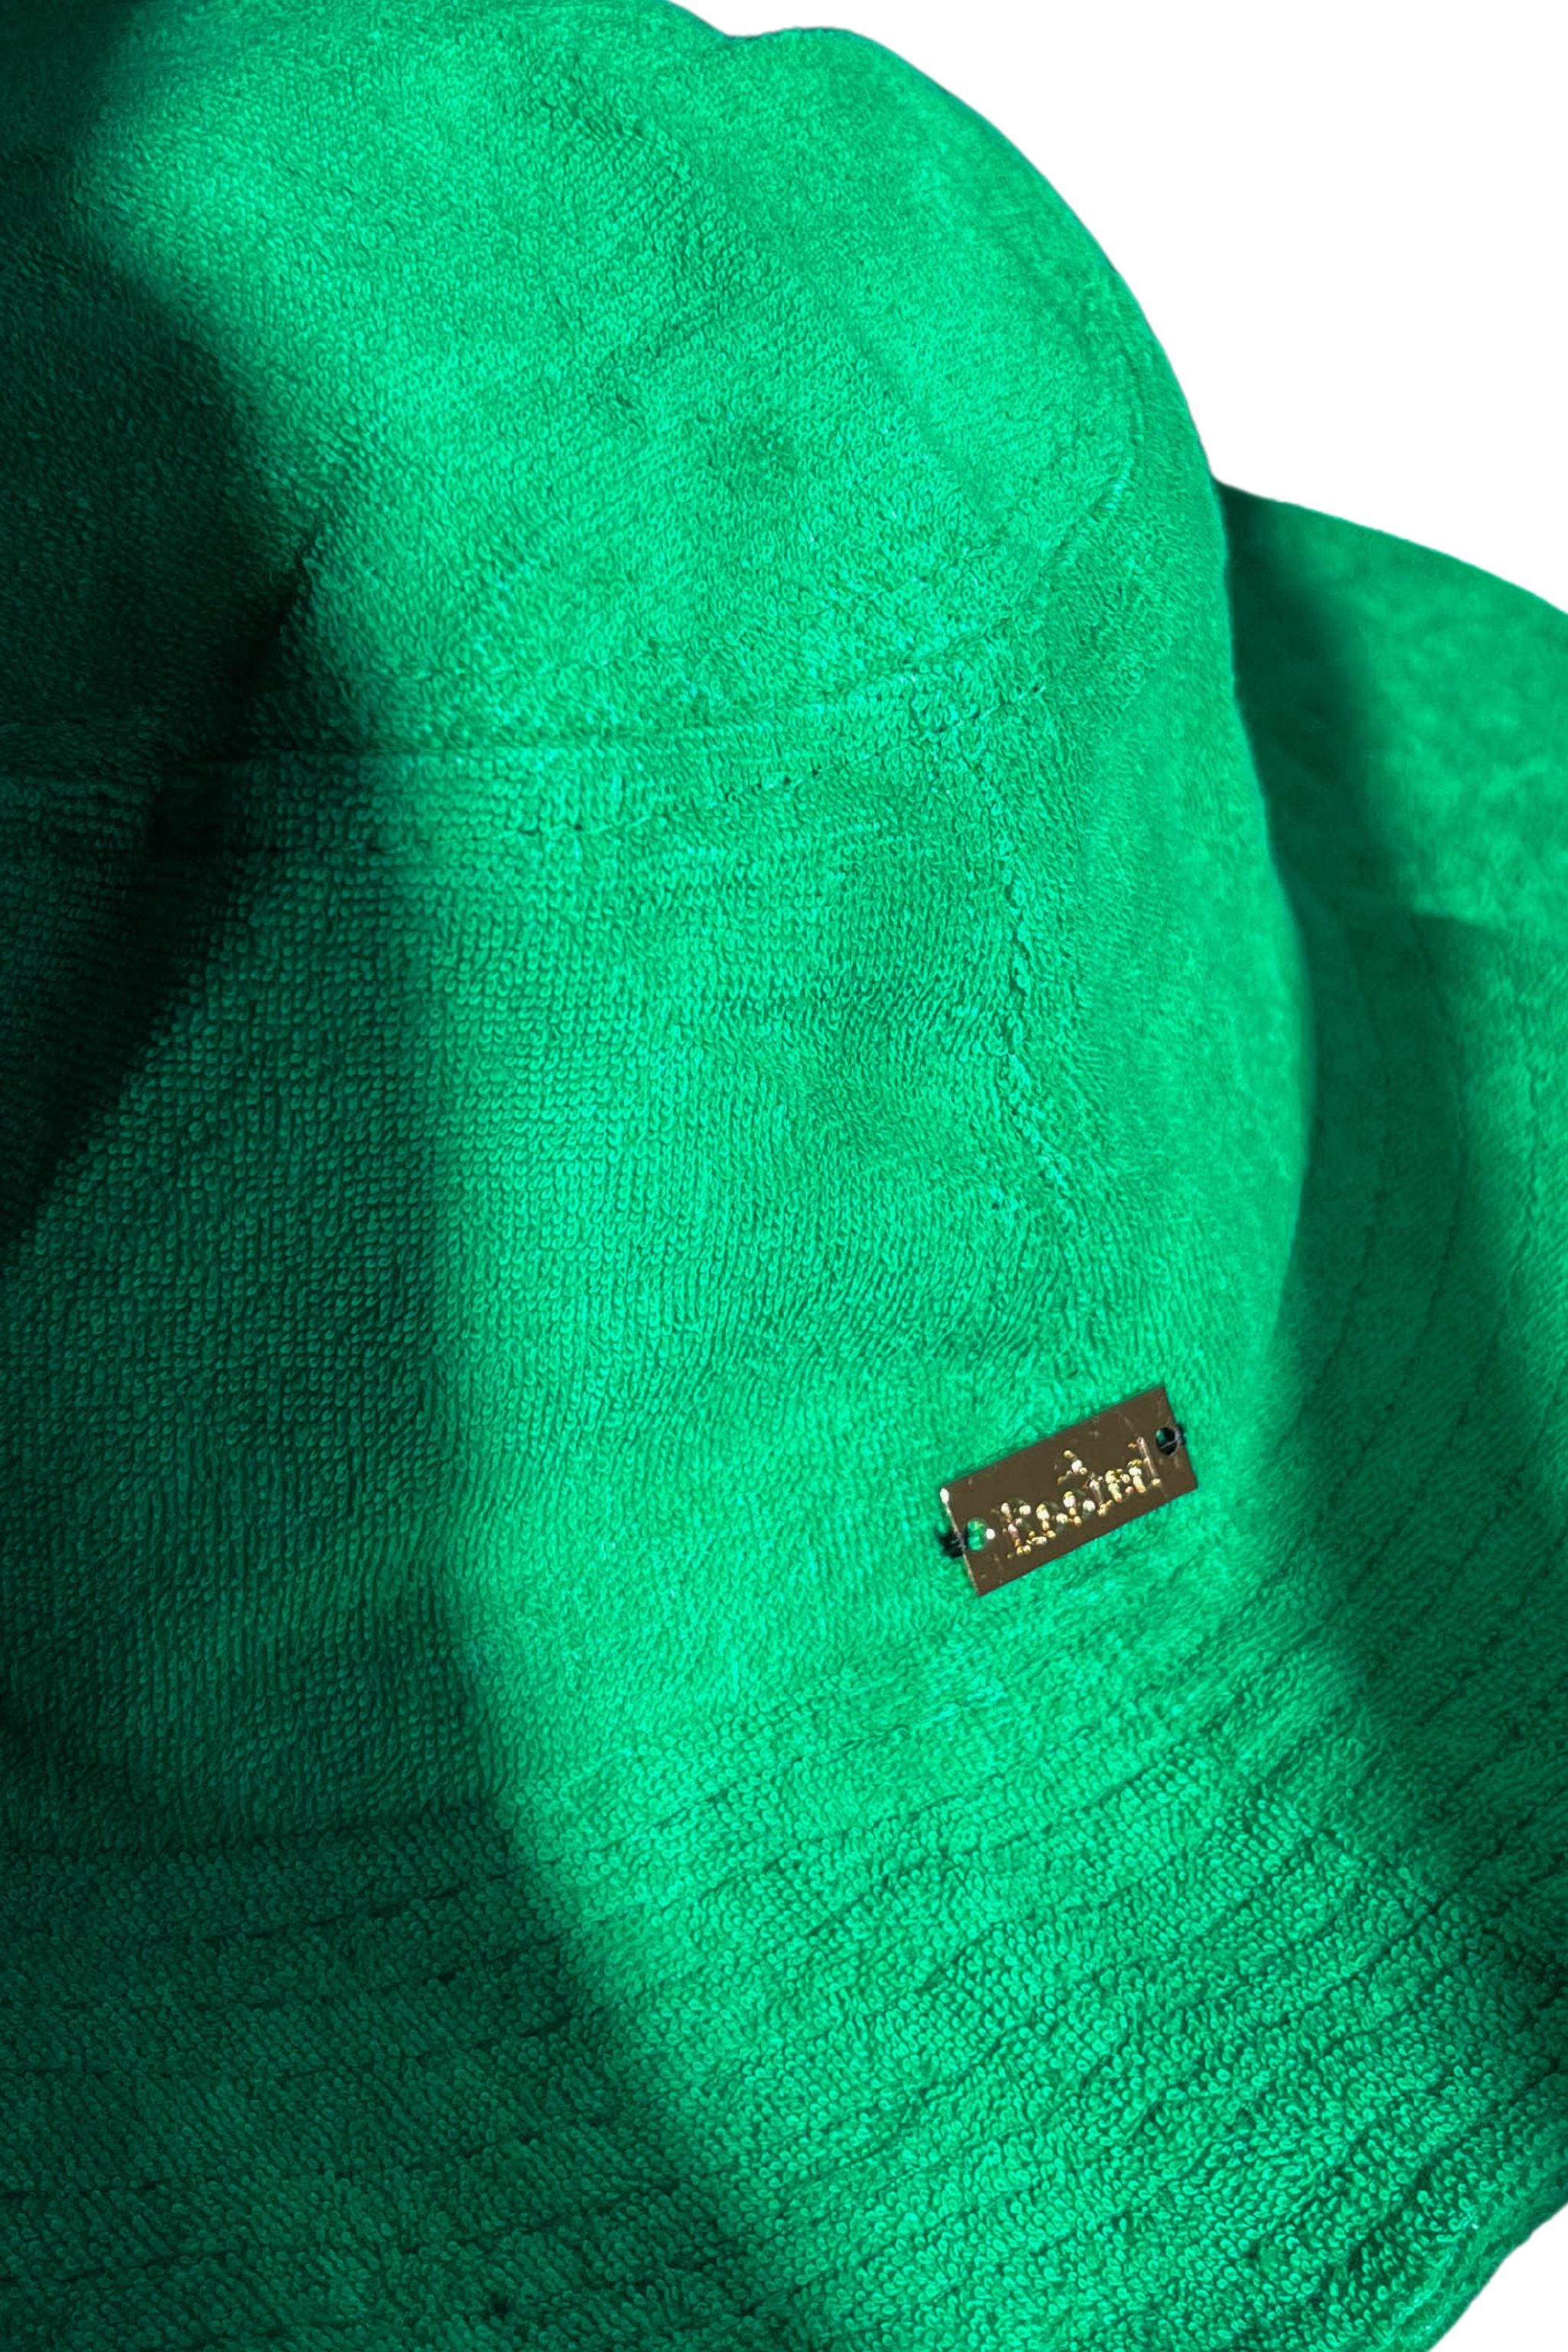 Terry Cloth Hat in the color Seaweed